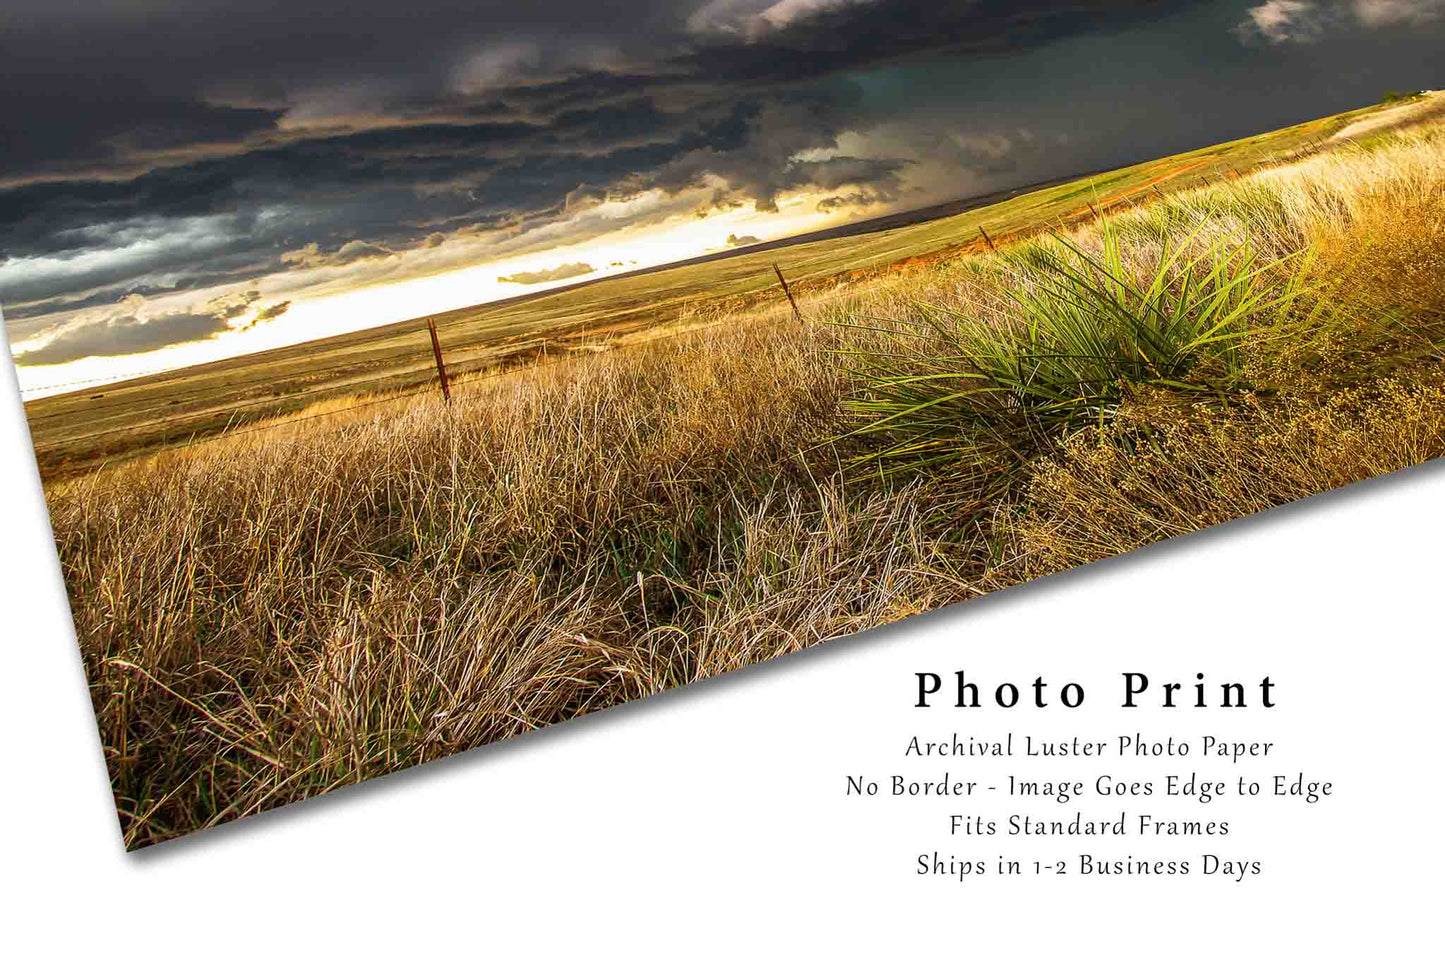 Storm Photography Print (Not Framed) Picture of Thunderstorm Over Open Plains in Texas Panhandle Great Plains Wall Art Western Decor